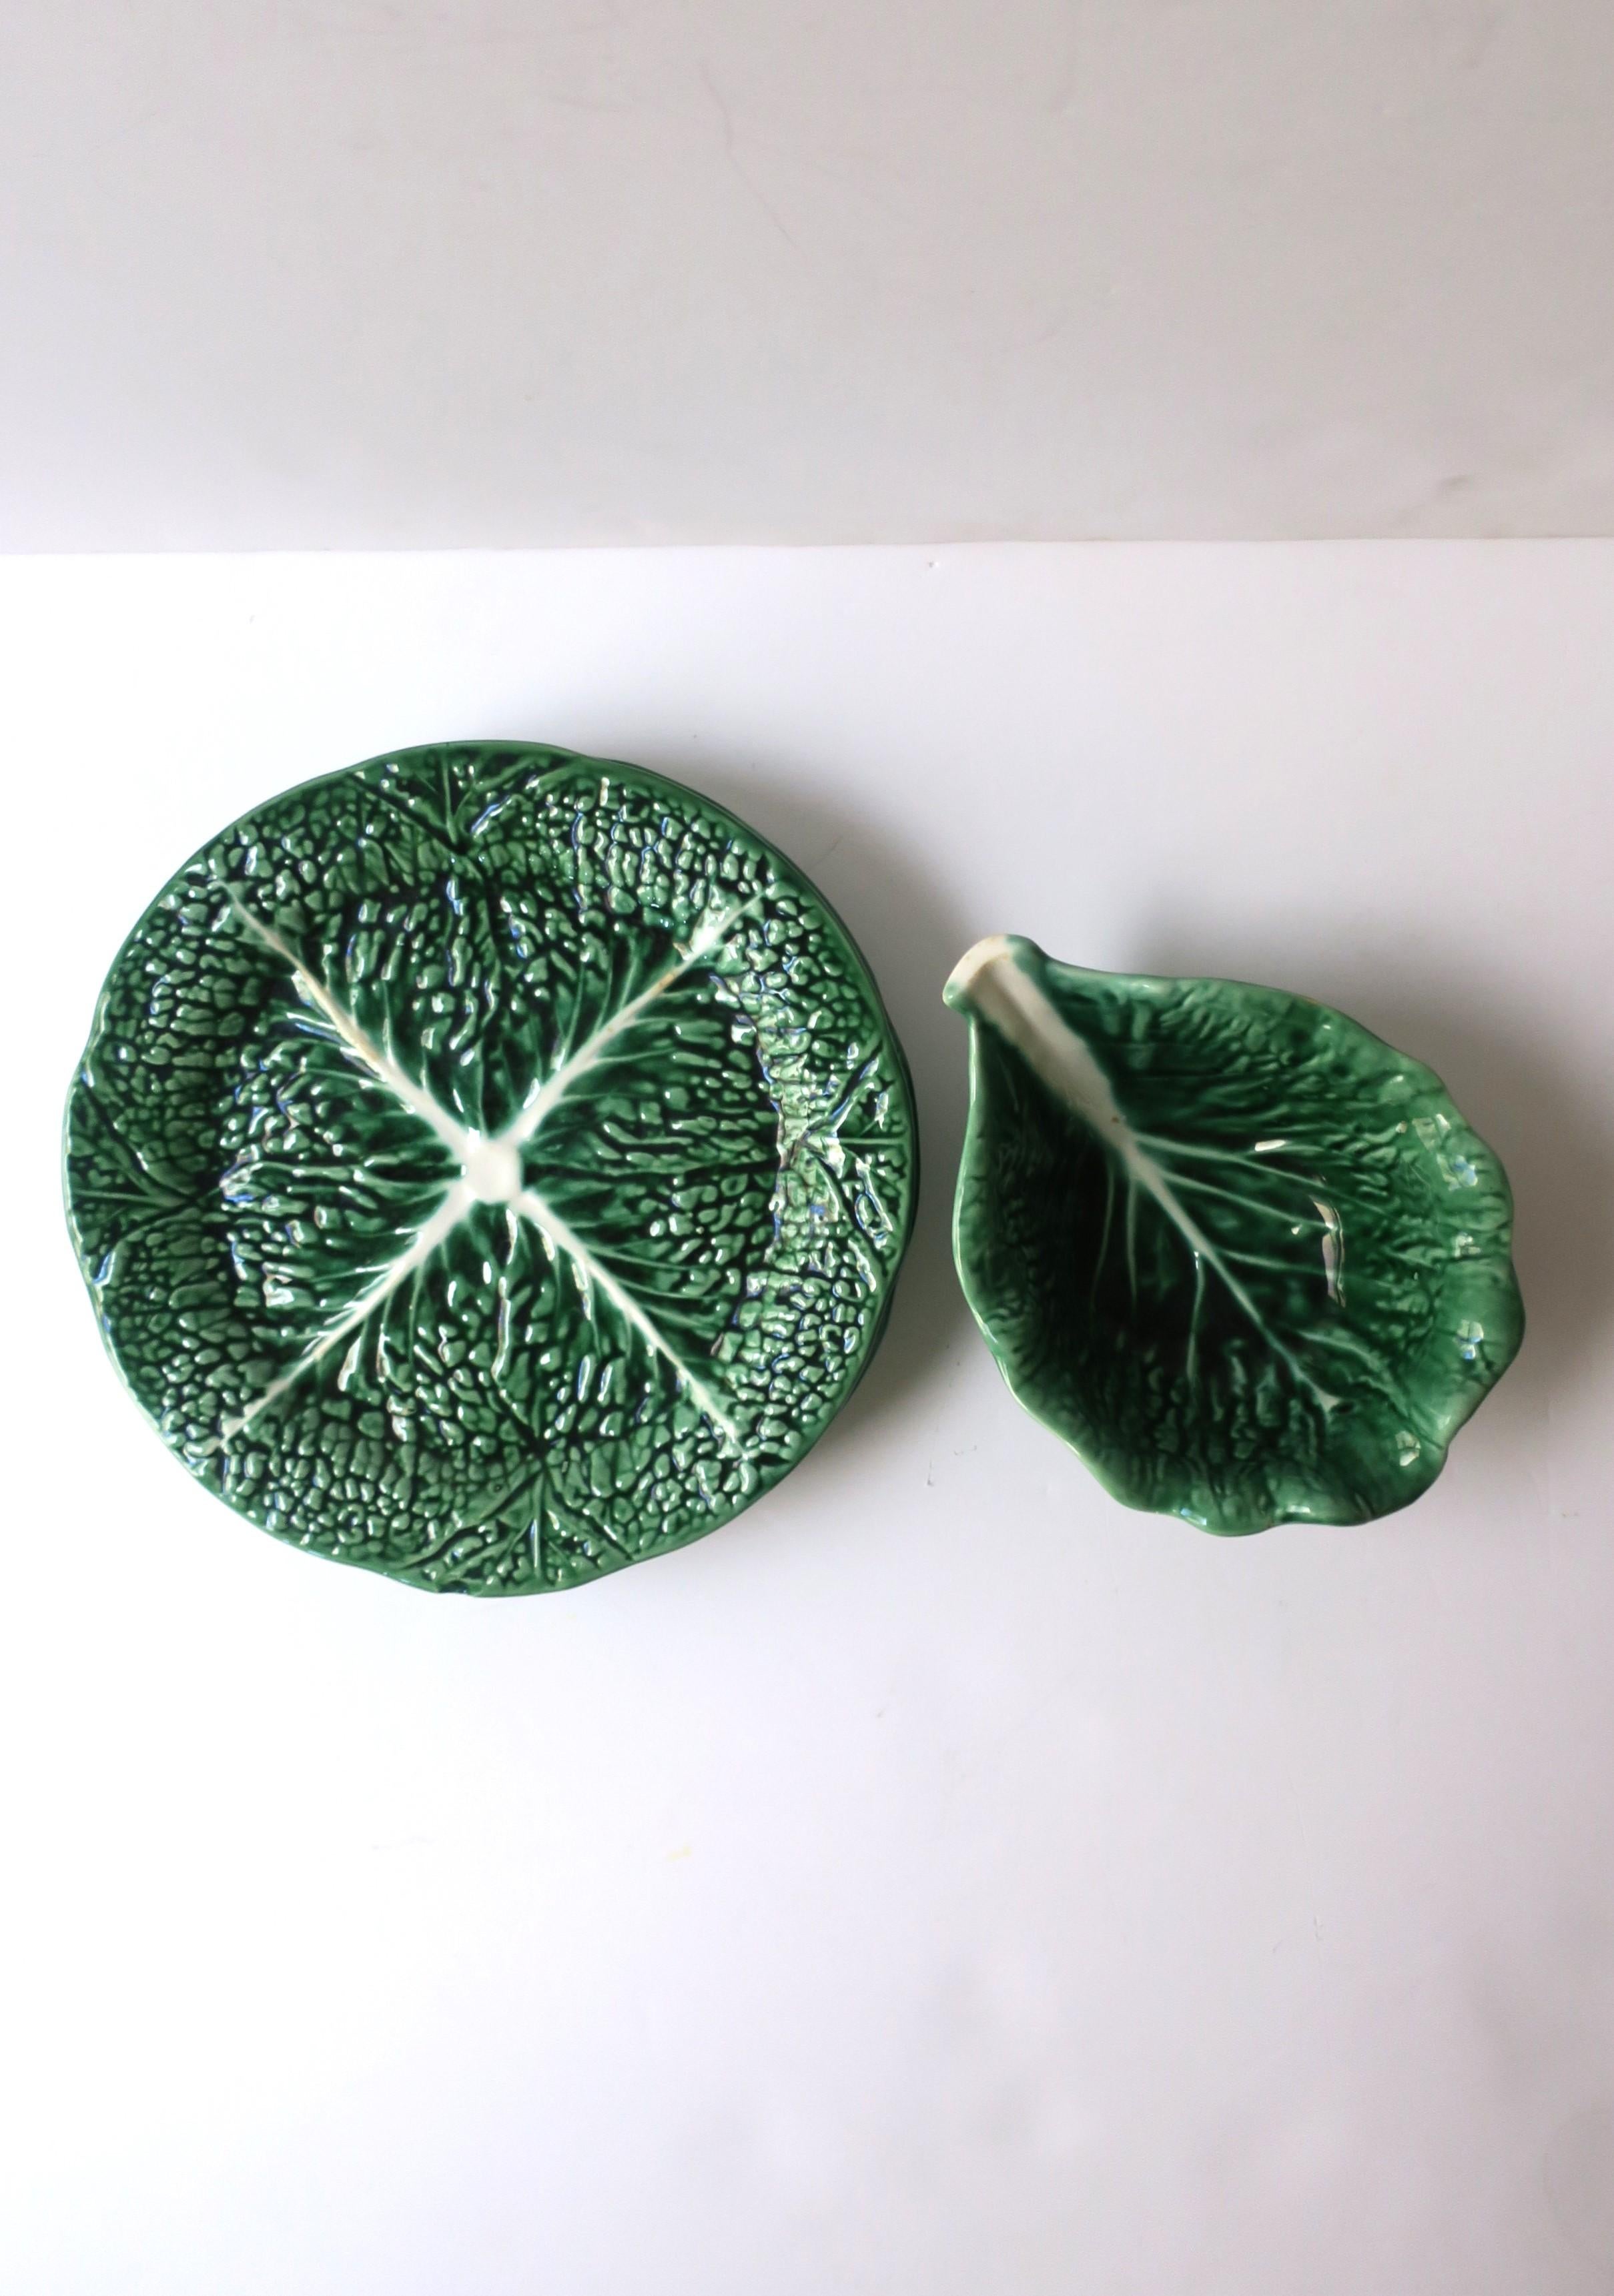 Ceramic Lettuce or Cabbage Leaf Plates Green and White, Set of 4 For Sale